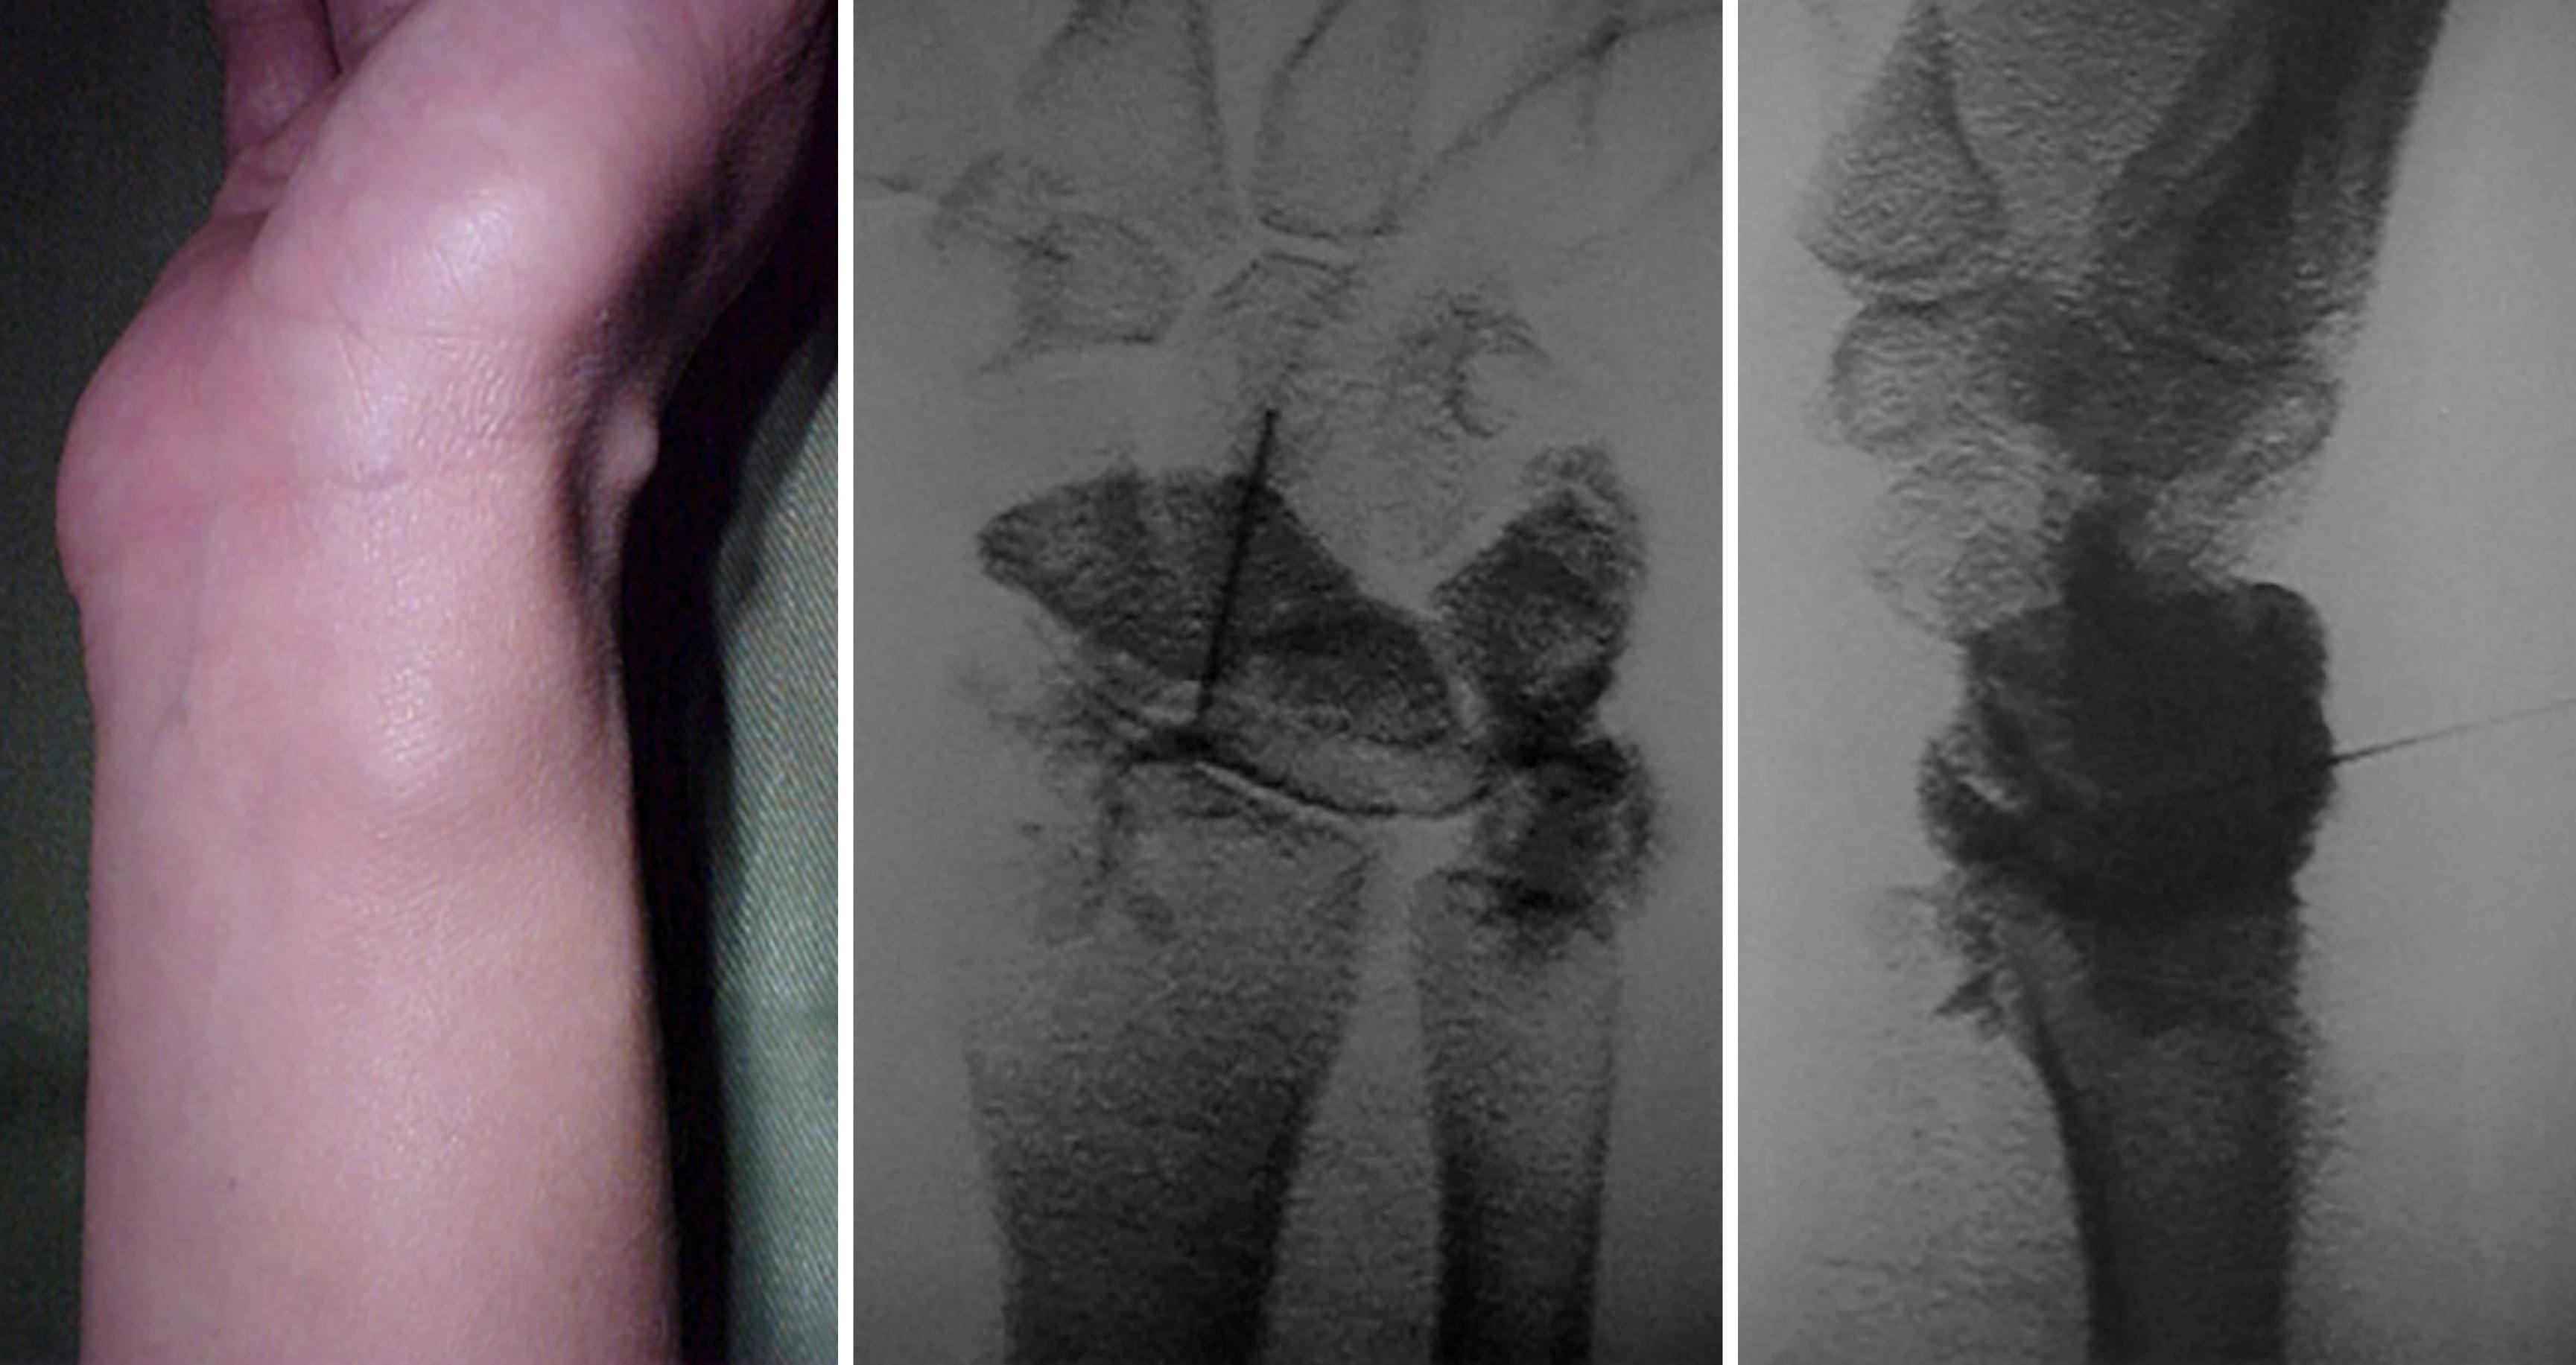 Fig. 17.13, Intraoperative wrist arthrogram to demonstrate the communication of the ganglion cyst with the wrist joint through the stalk.